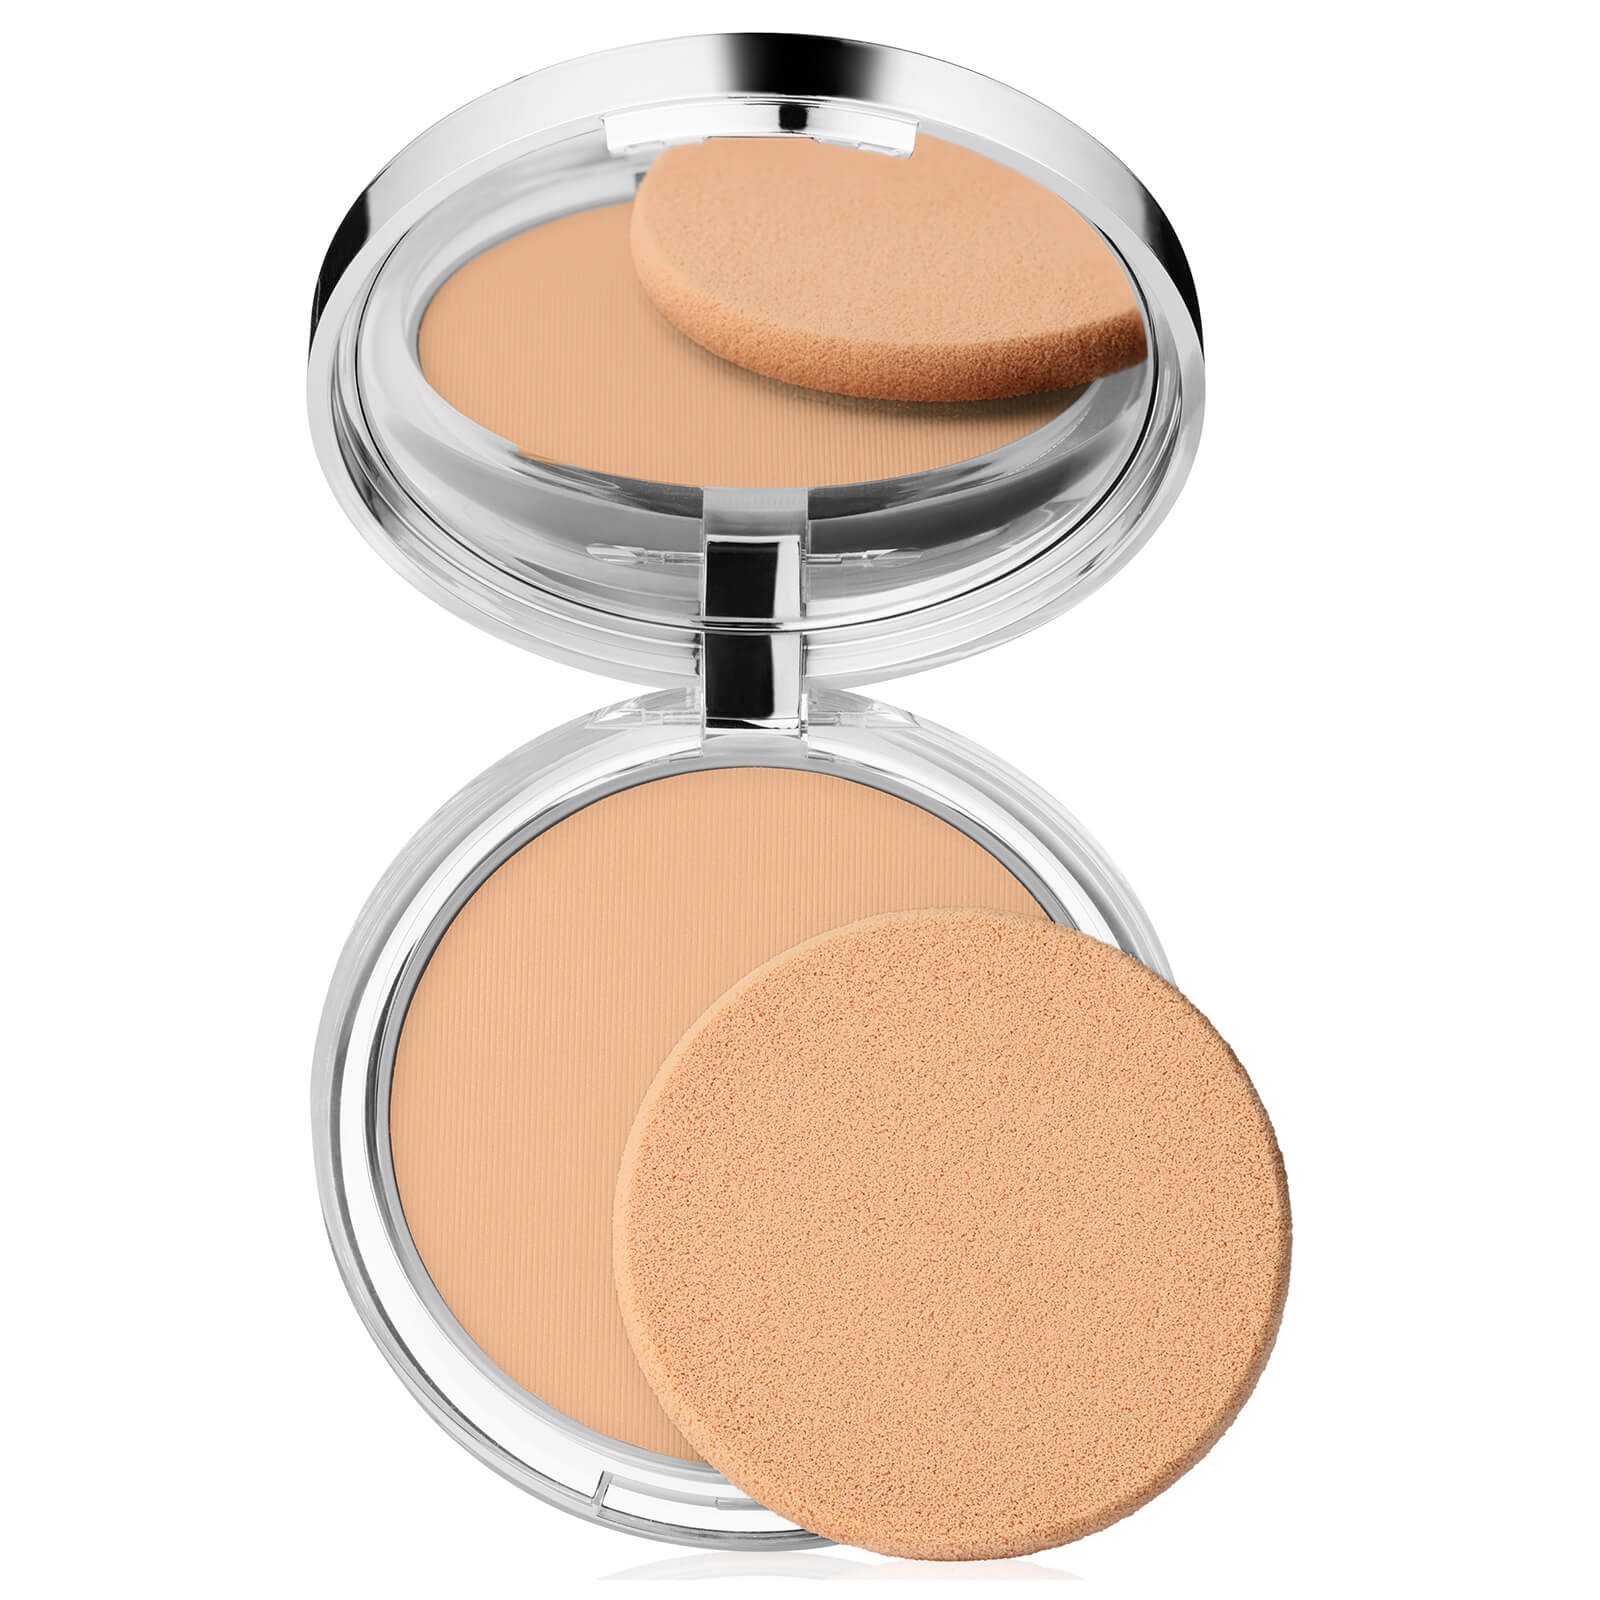 Clinique Stay-Matte Sheer Pressed Powder Oil-Free 7.6g (Various Shades) - Stay Beige